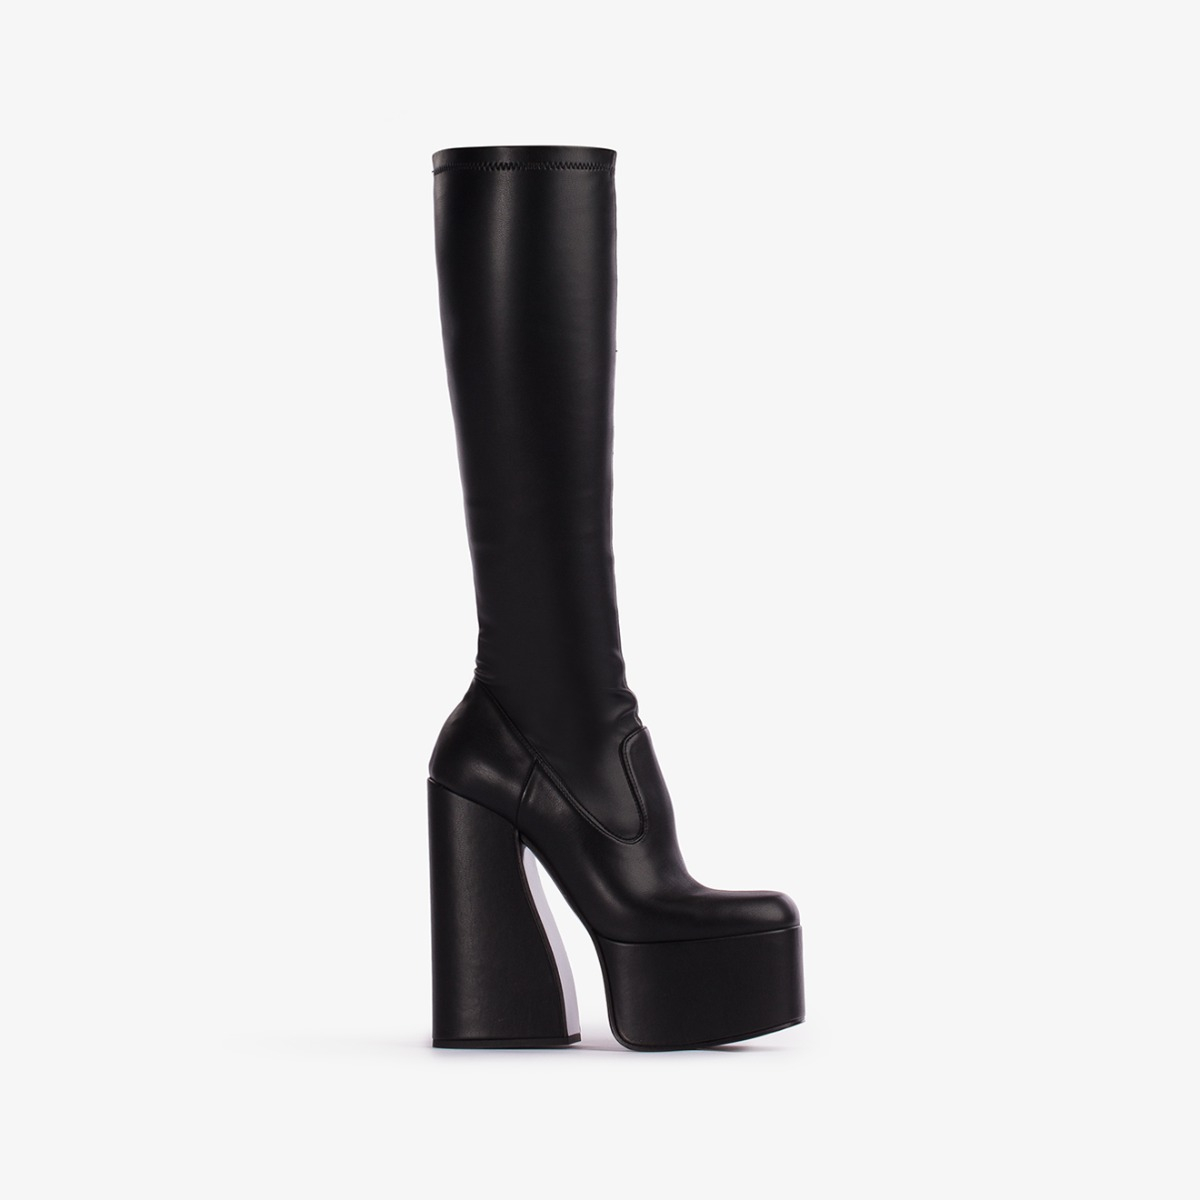 NIKKI BOOT 170 mm - Le Silla official outlet